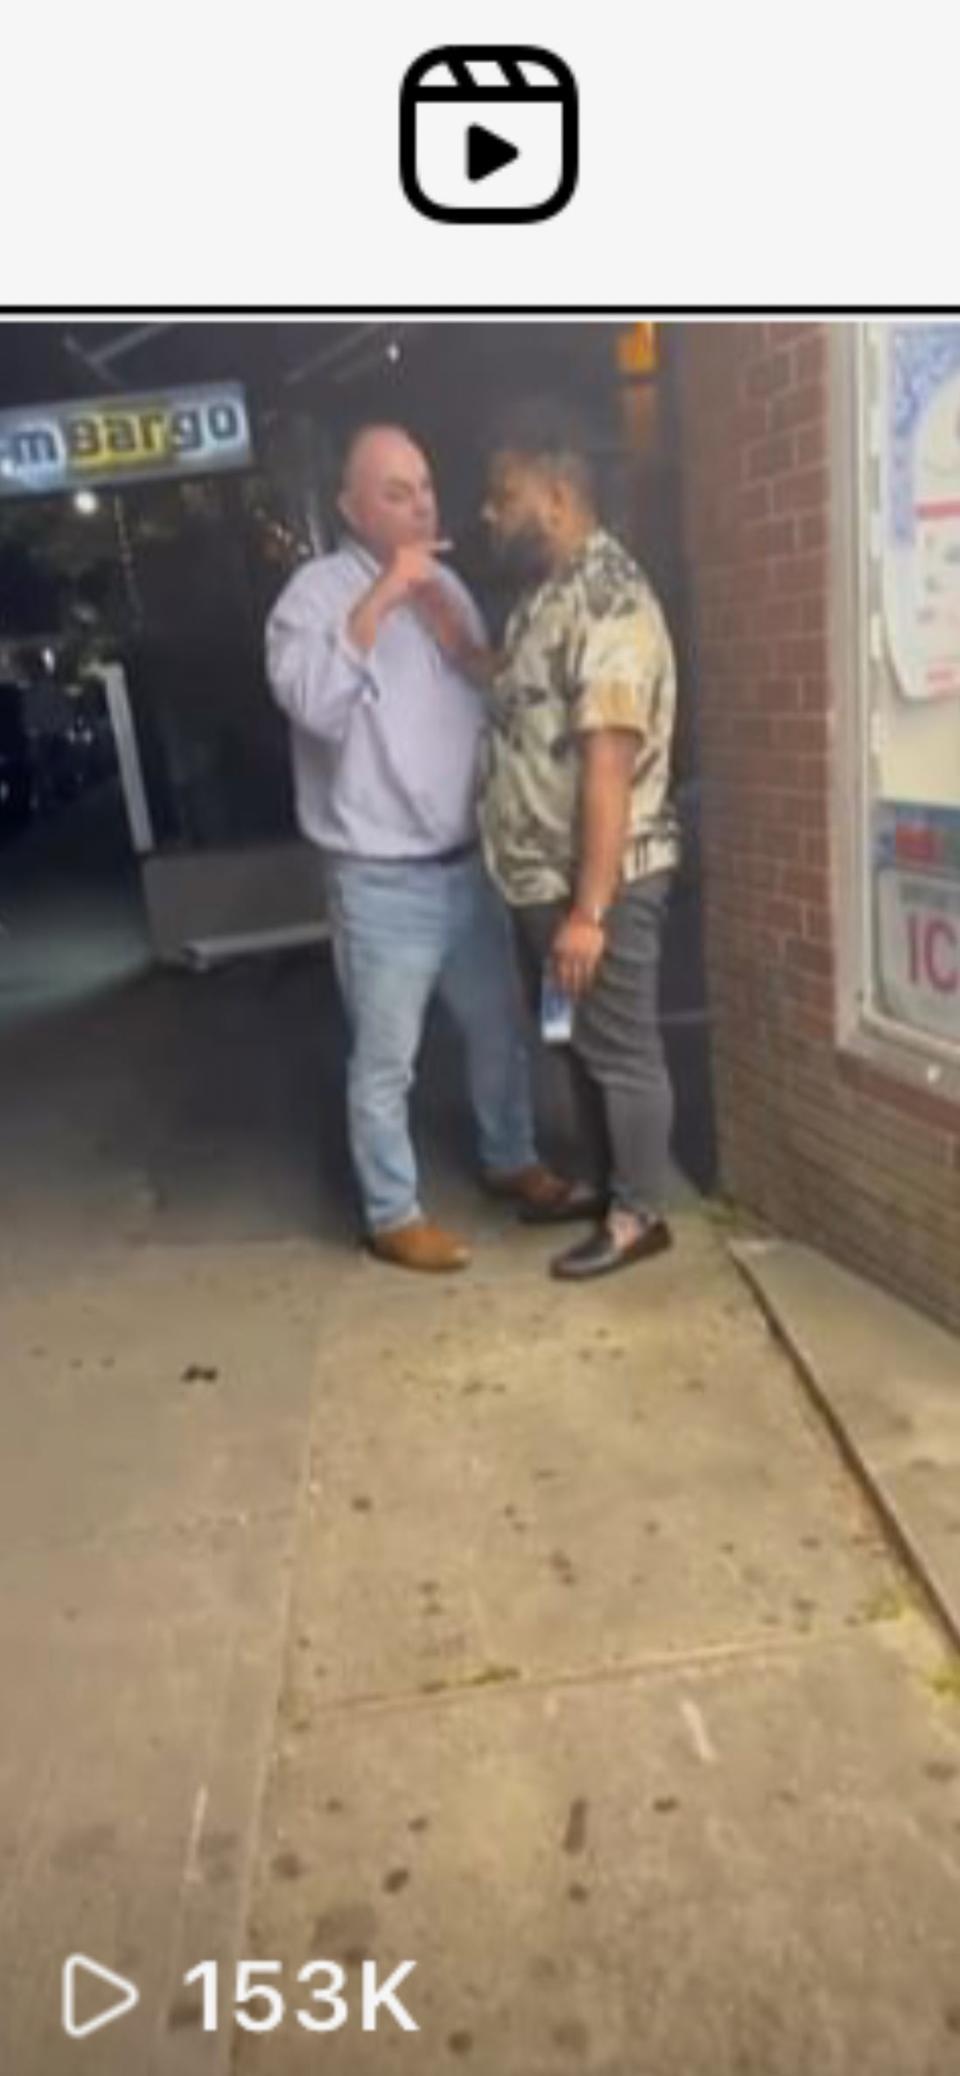 A screenshot from an Instagram video shows John Shea, a businessman associated with Trader Ed's in Hyannis, and Millyan Phillips of Medford on Thursday on Main Street in Hyannis. An altercation between Shea and Phillips is under investigation by a Barnstable Police Department civil rights officer.